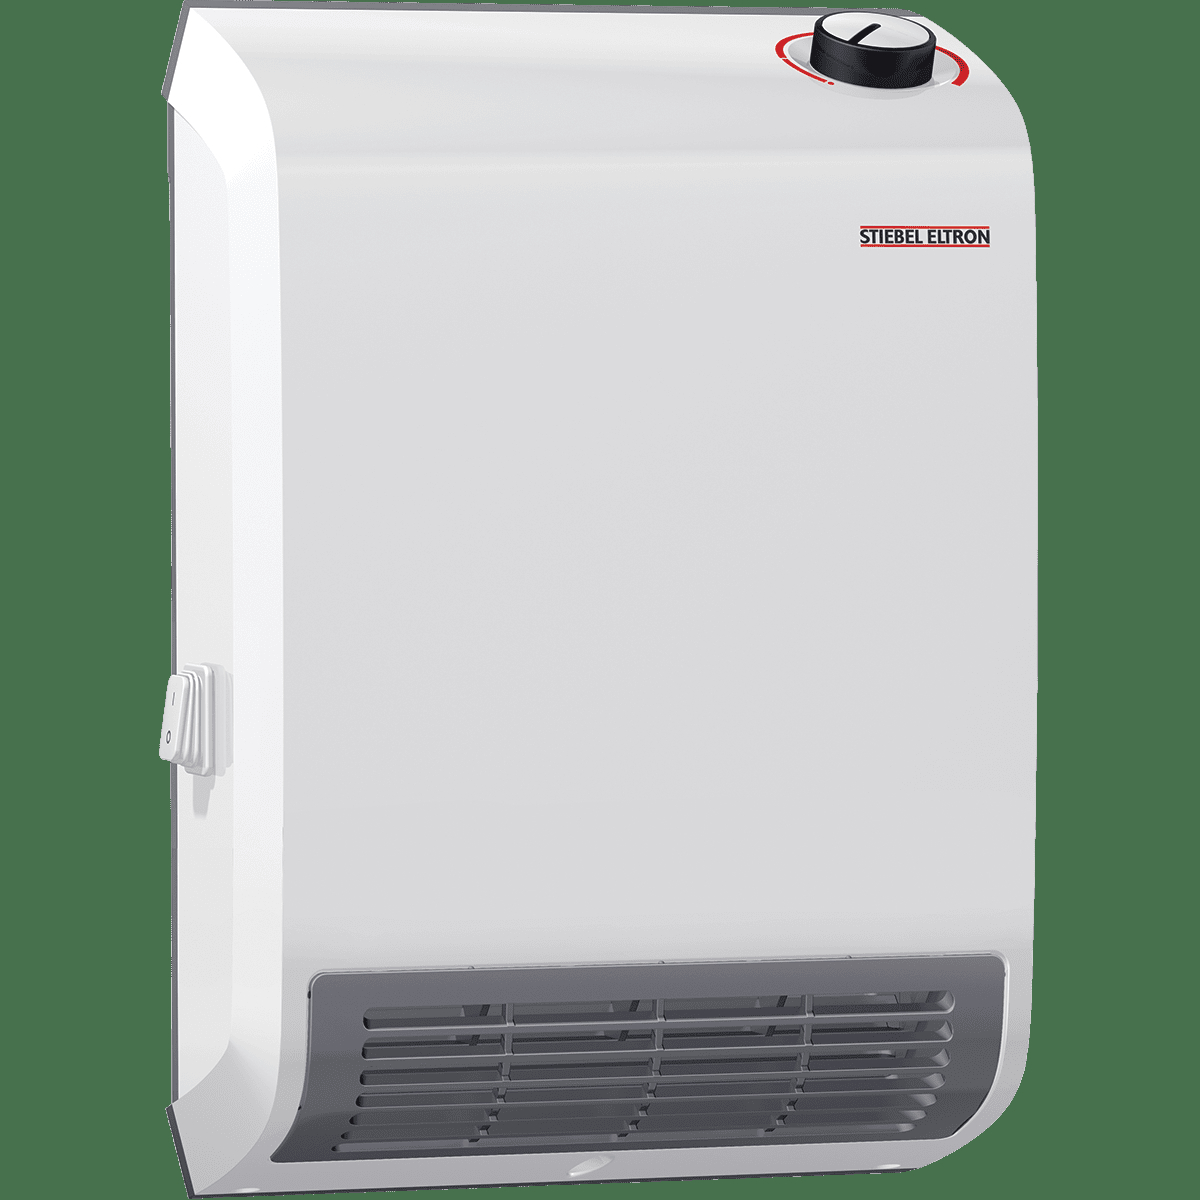 Stiebel Eltron Ck Trend Wall Mounted Electric Fan Heaters intended for measurements 1200 X 1200